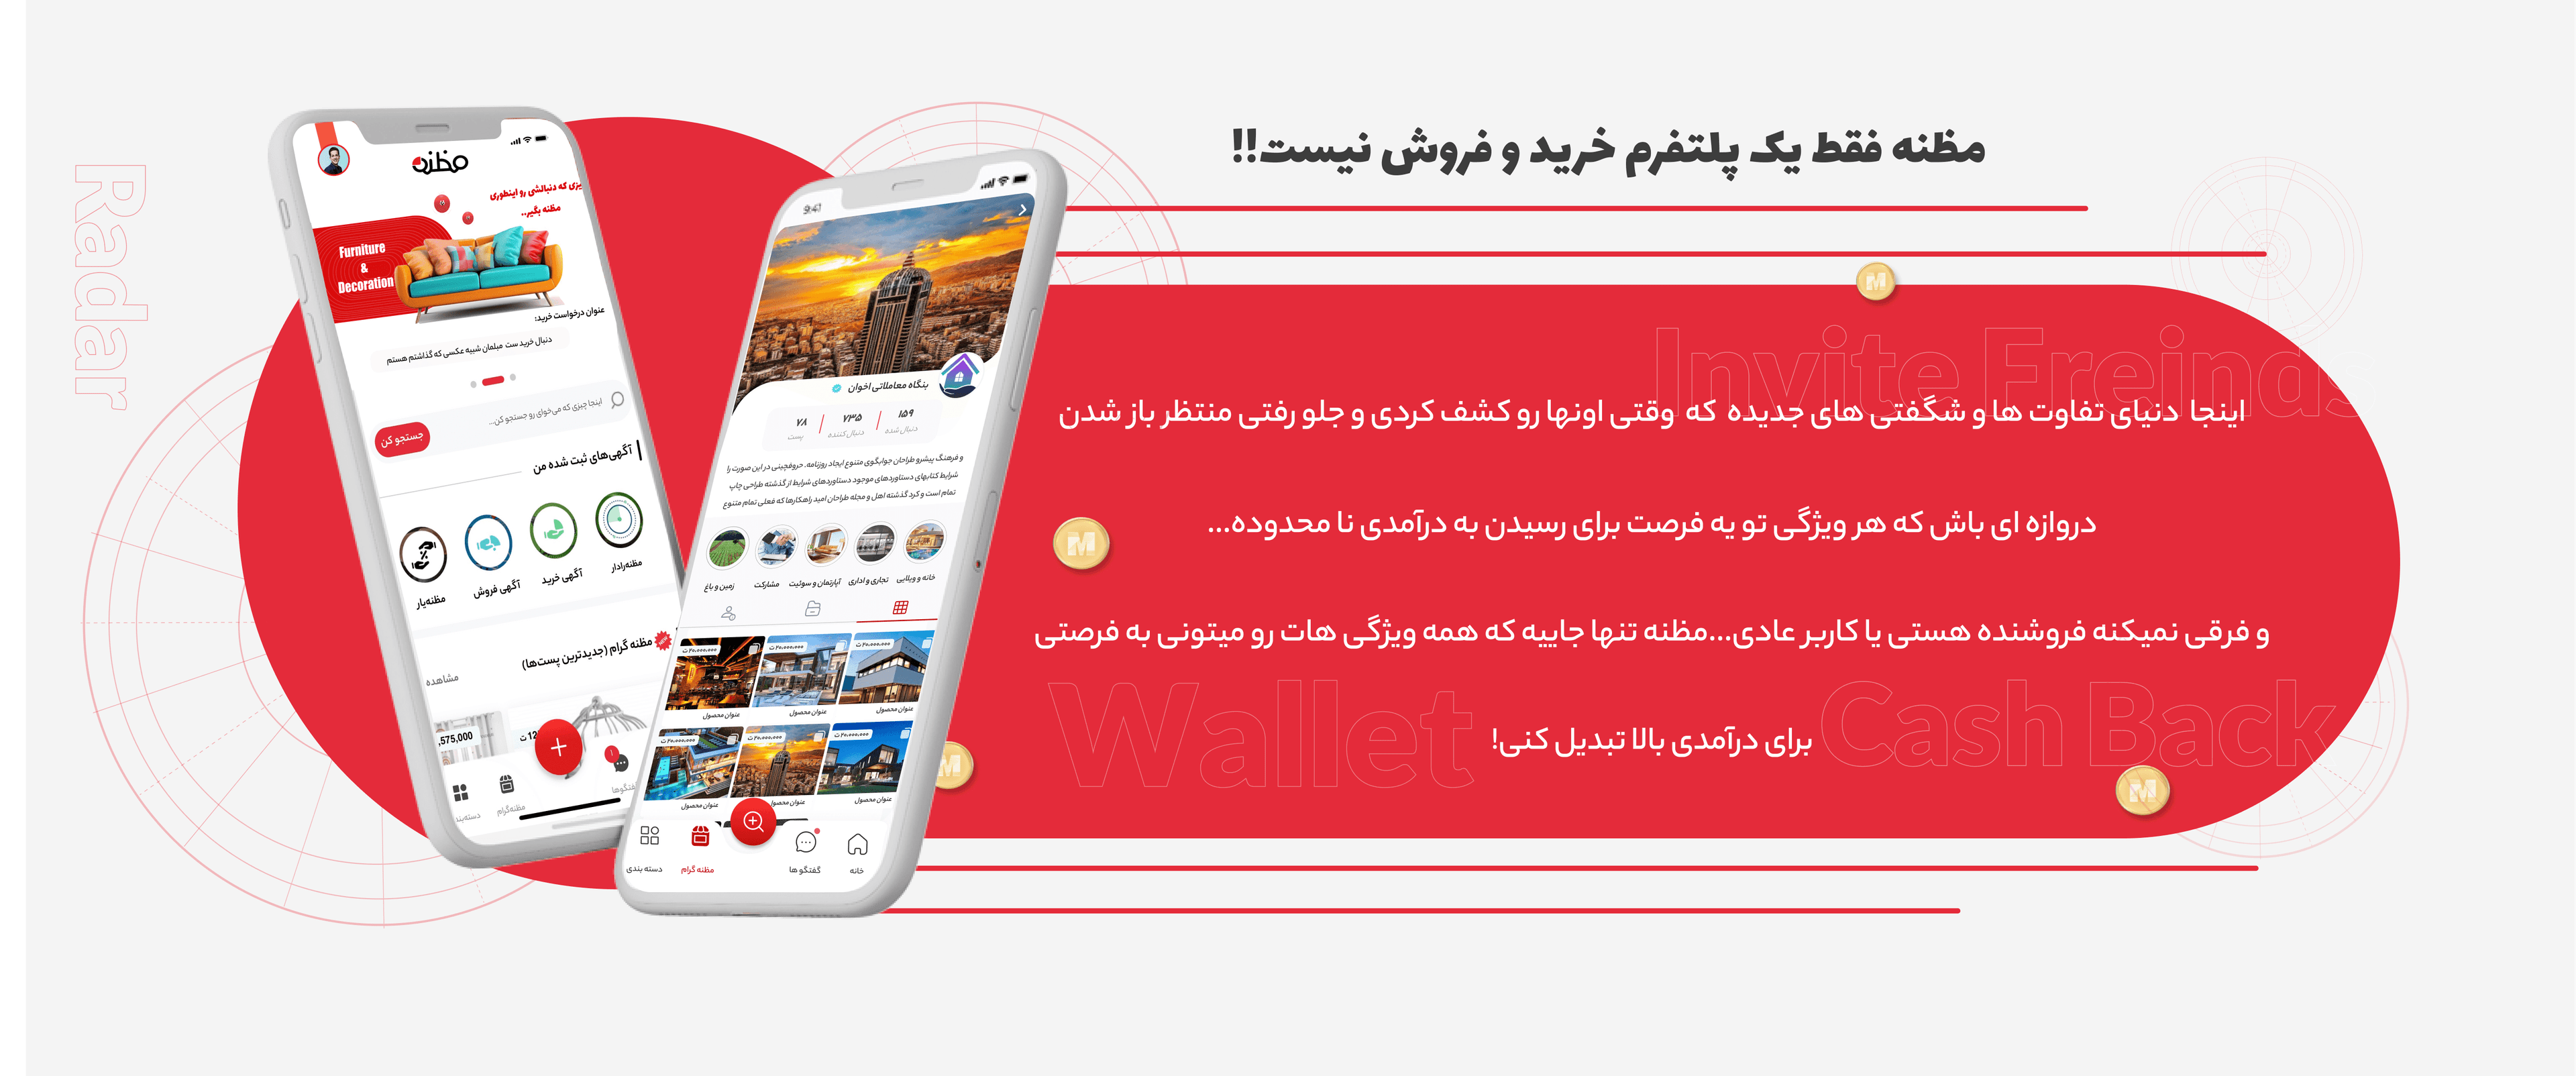 کیف پول مظنه مزنه دلار مظنه درآمد زایی در مظنه مزنه درآمد ارزیIn the quote, all businesses can ask us to connect businesses or users related to their industry (basically, their target customers) and this is applicable to all businesses of any size. LT is... How is your job valuable in the quote!! For example: the major seller of building paint wants us to connect users with painter jobs and tool stores to them, or a clothing manufacturer wants boutiques to connect to them, and any business can attract them just by specifying its target customers. How is the process of attracting customers, the goal of every business??  A